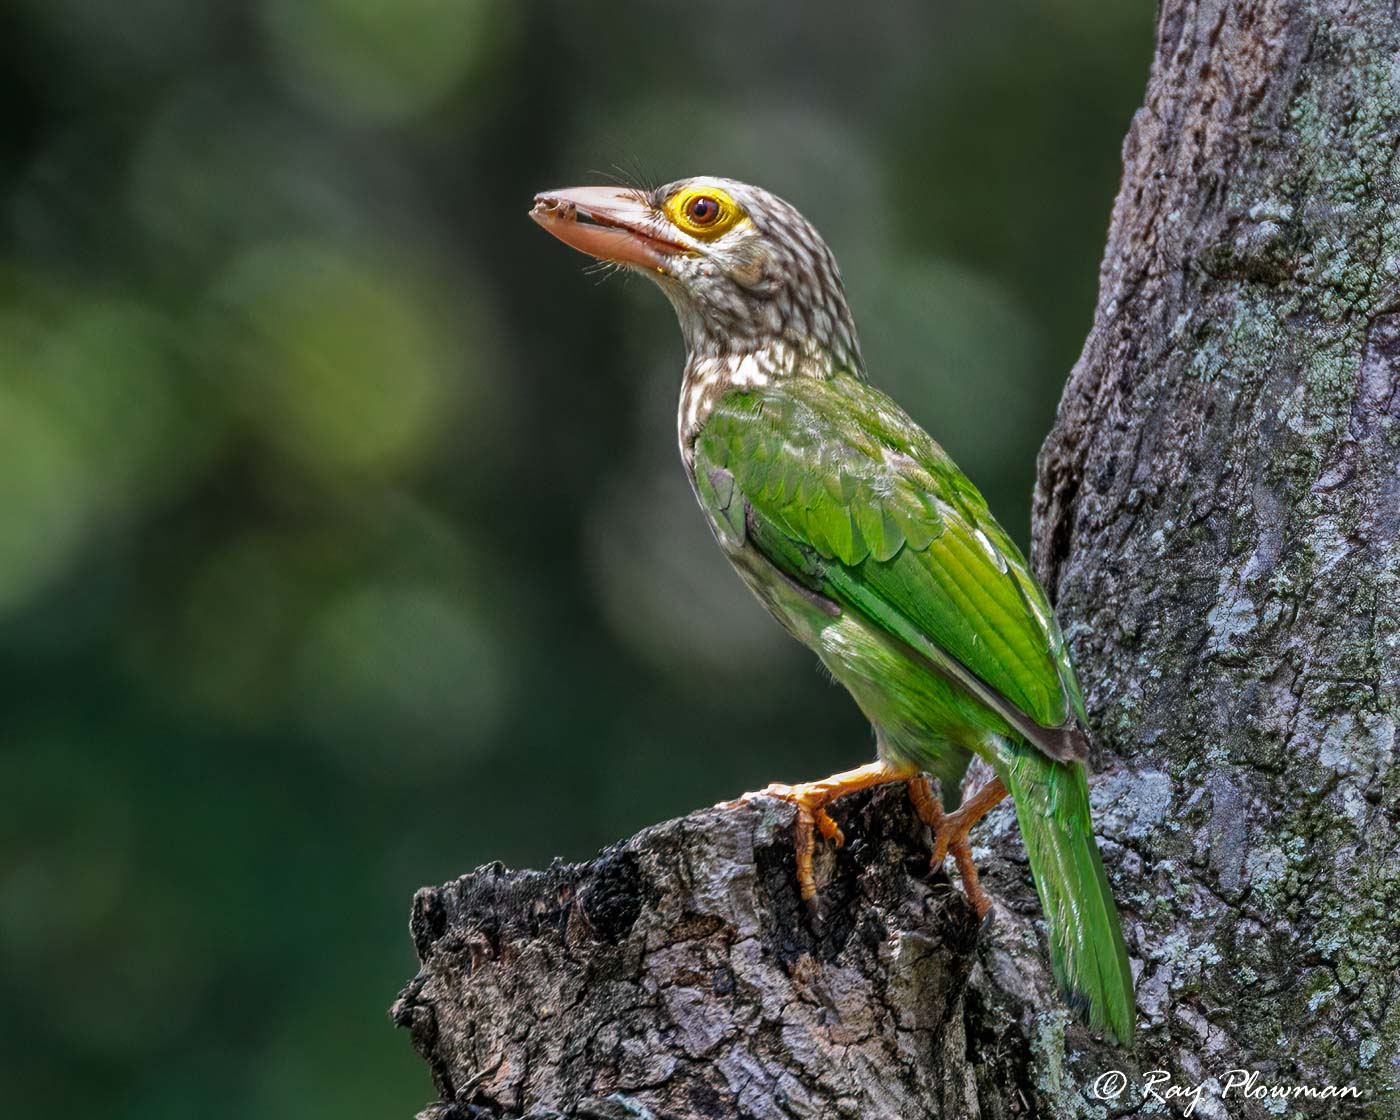 Lineated Barbet (Psilopogon lineatus hodgsoni) perched in a tree at Toh Yi Dr in Singapore